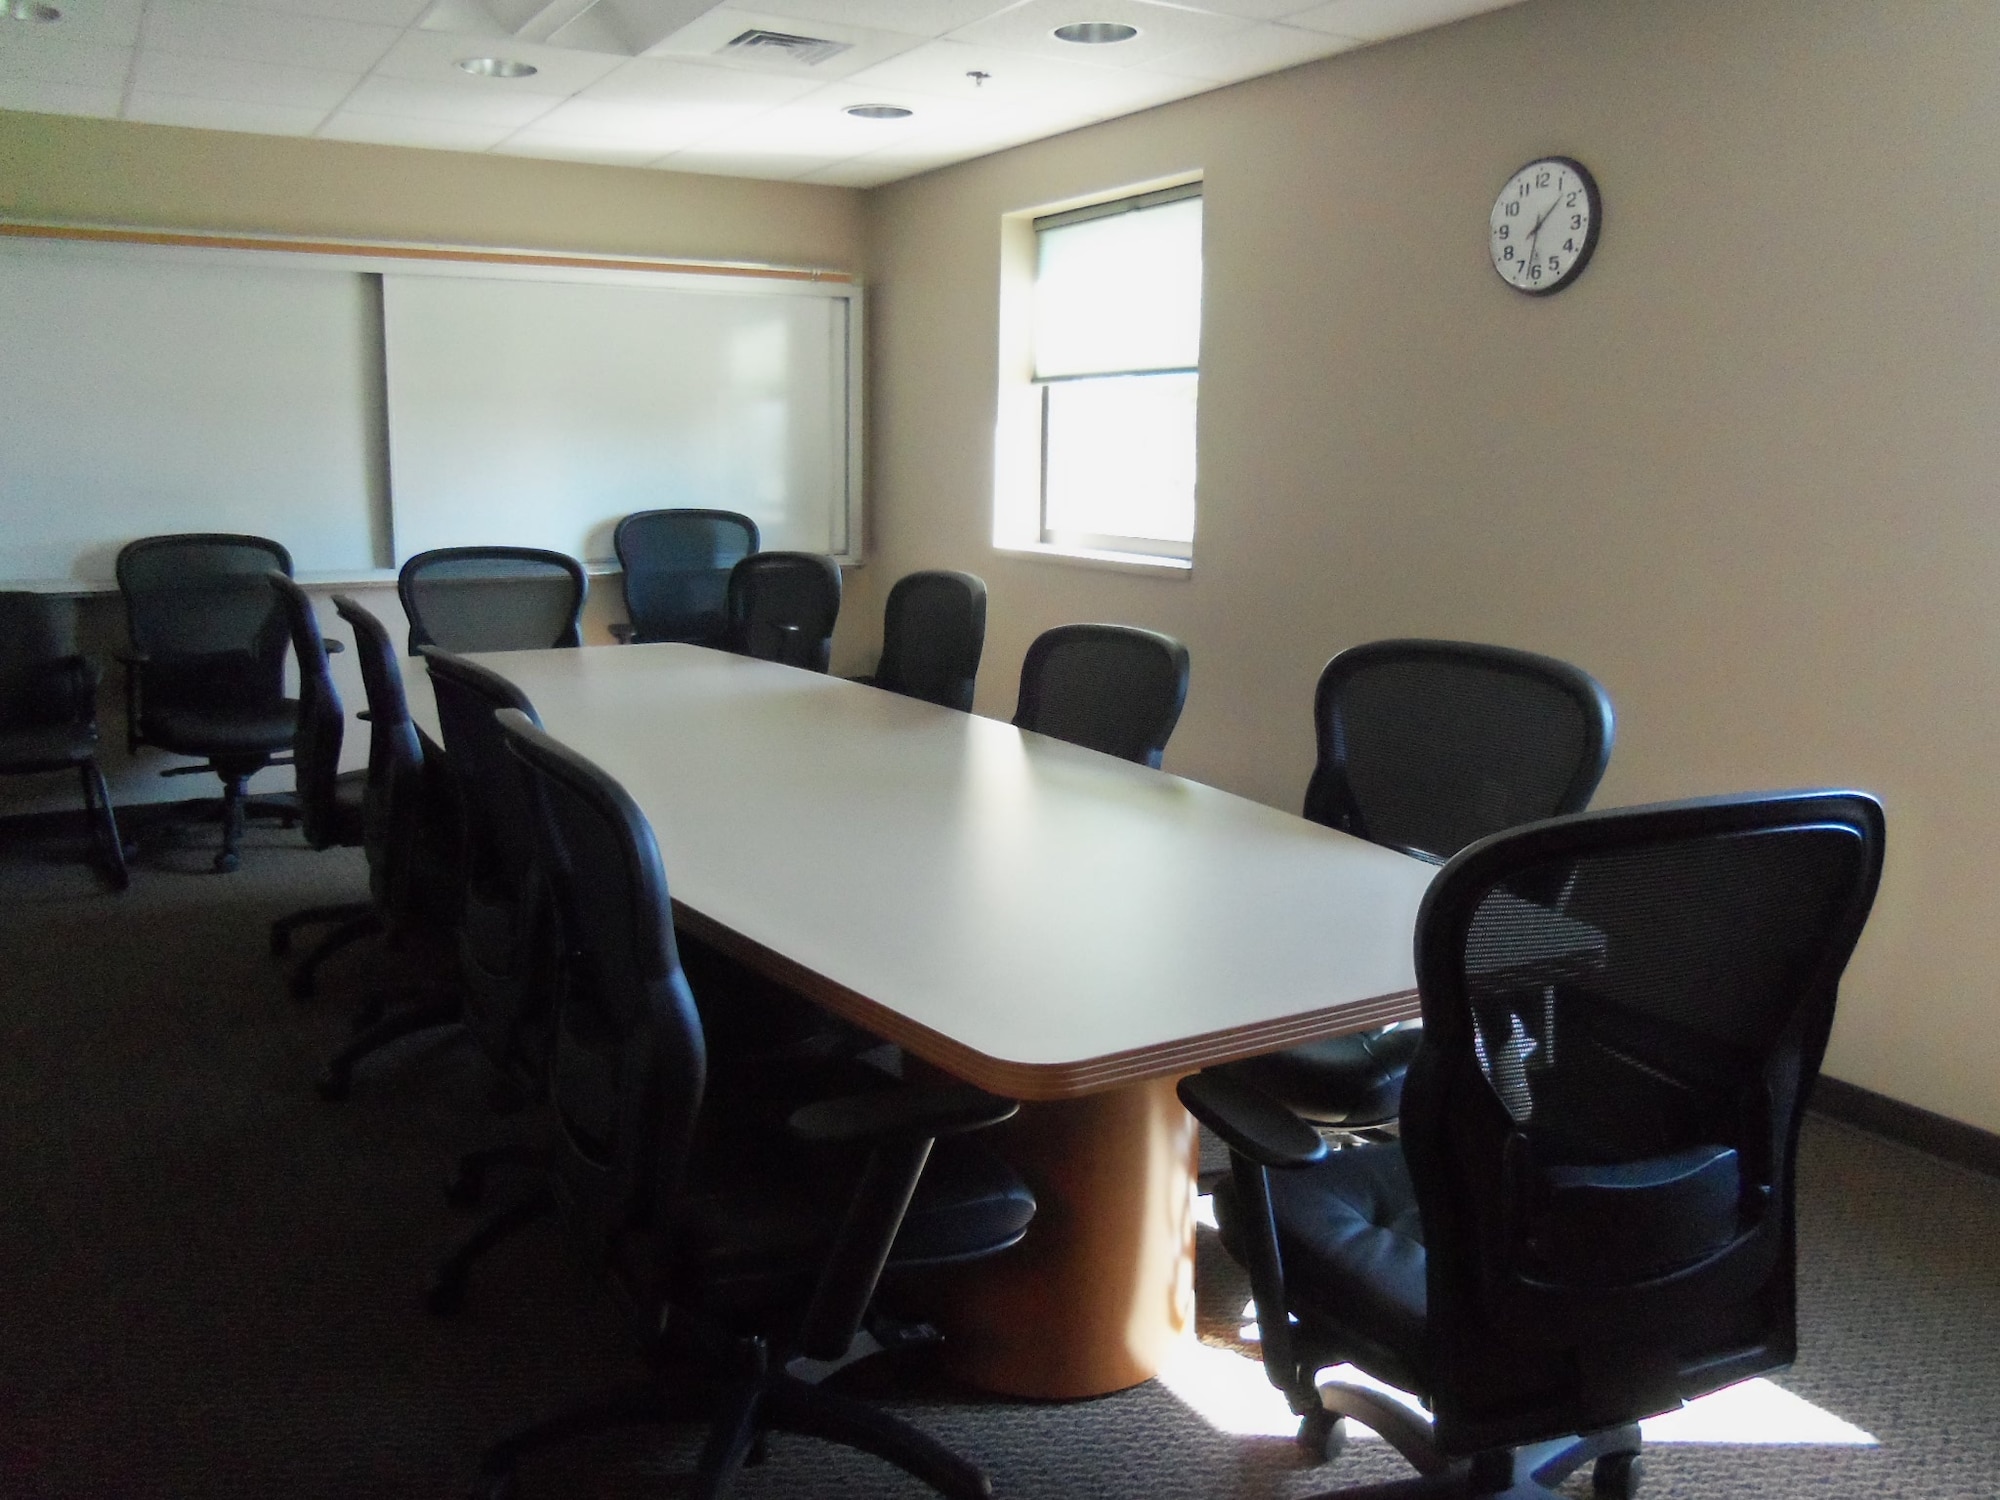 The Alpena CRTC Vehicle Maintenance facility offers a conference room with a laptop capable monitor.